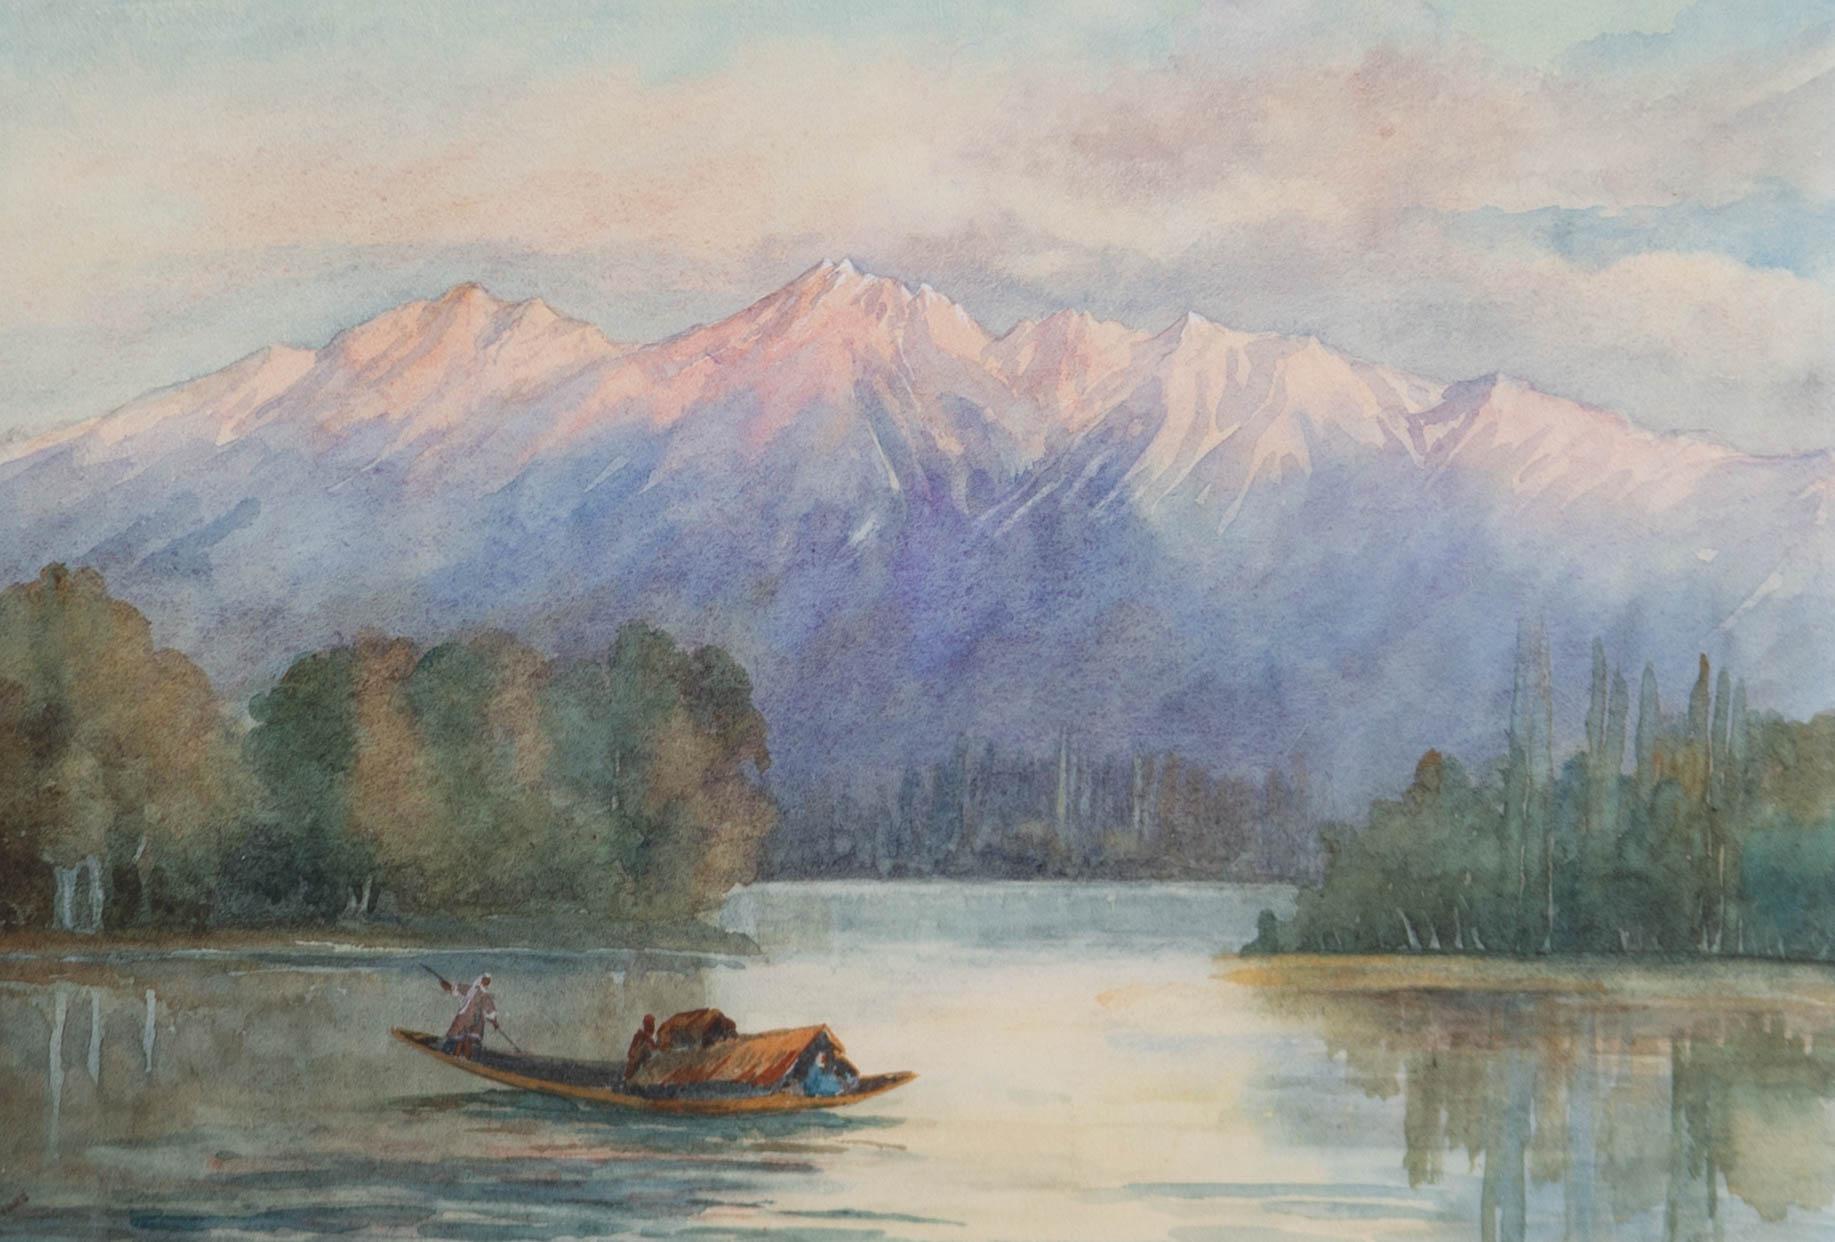 A fine watercolour painting by B. Maynard, depicting a mountainous lake scene with a boat and figures. Signed to the lower left-hand corner. Well-presented in a grey on white double card mount and in a speckled gilt effect frame, as shown. On